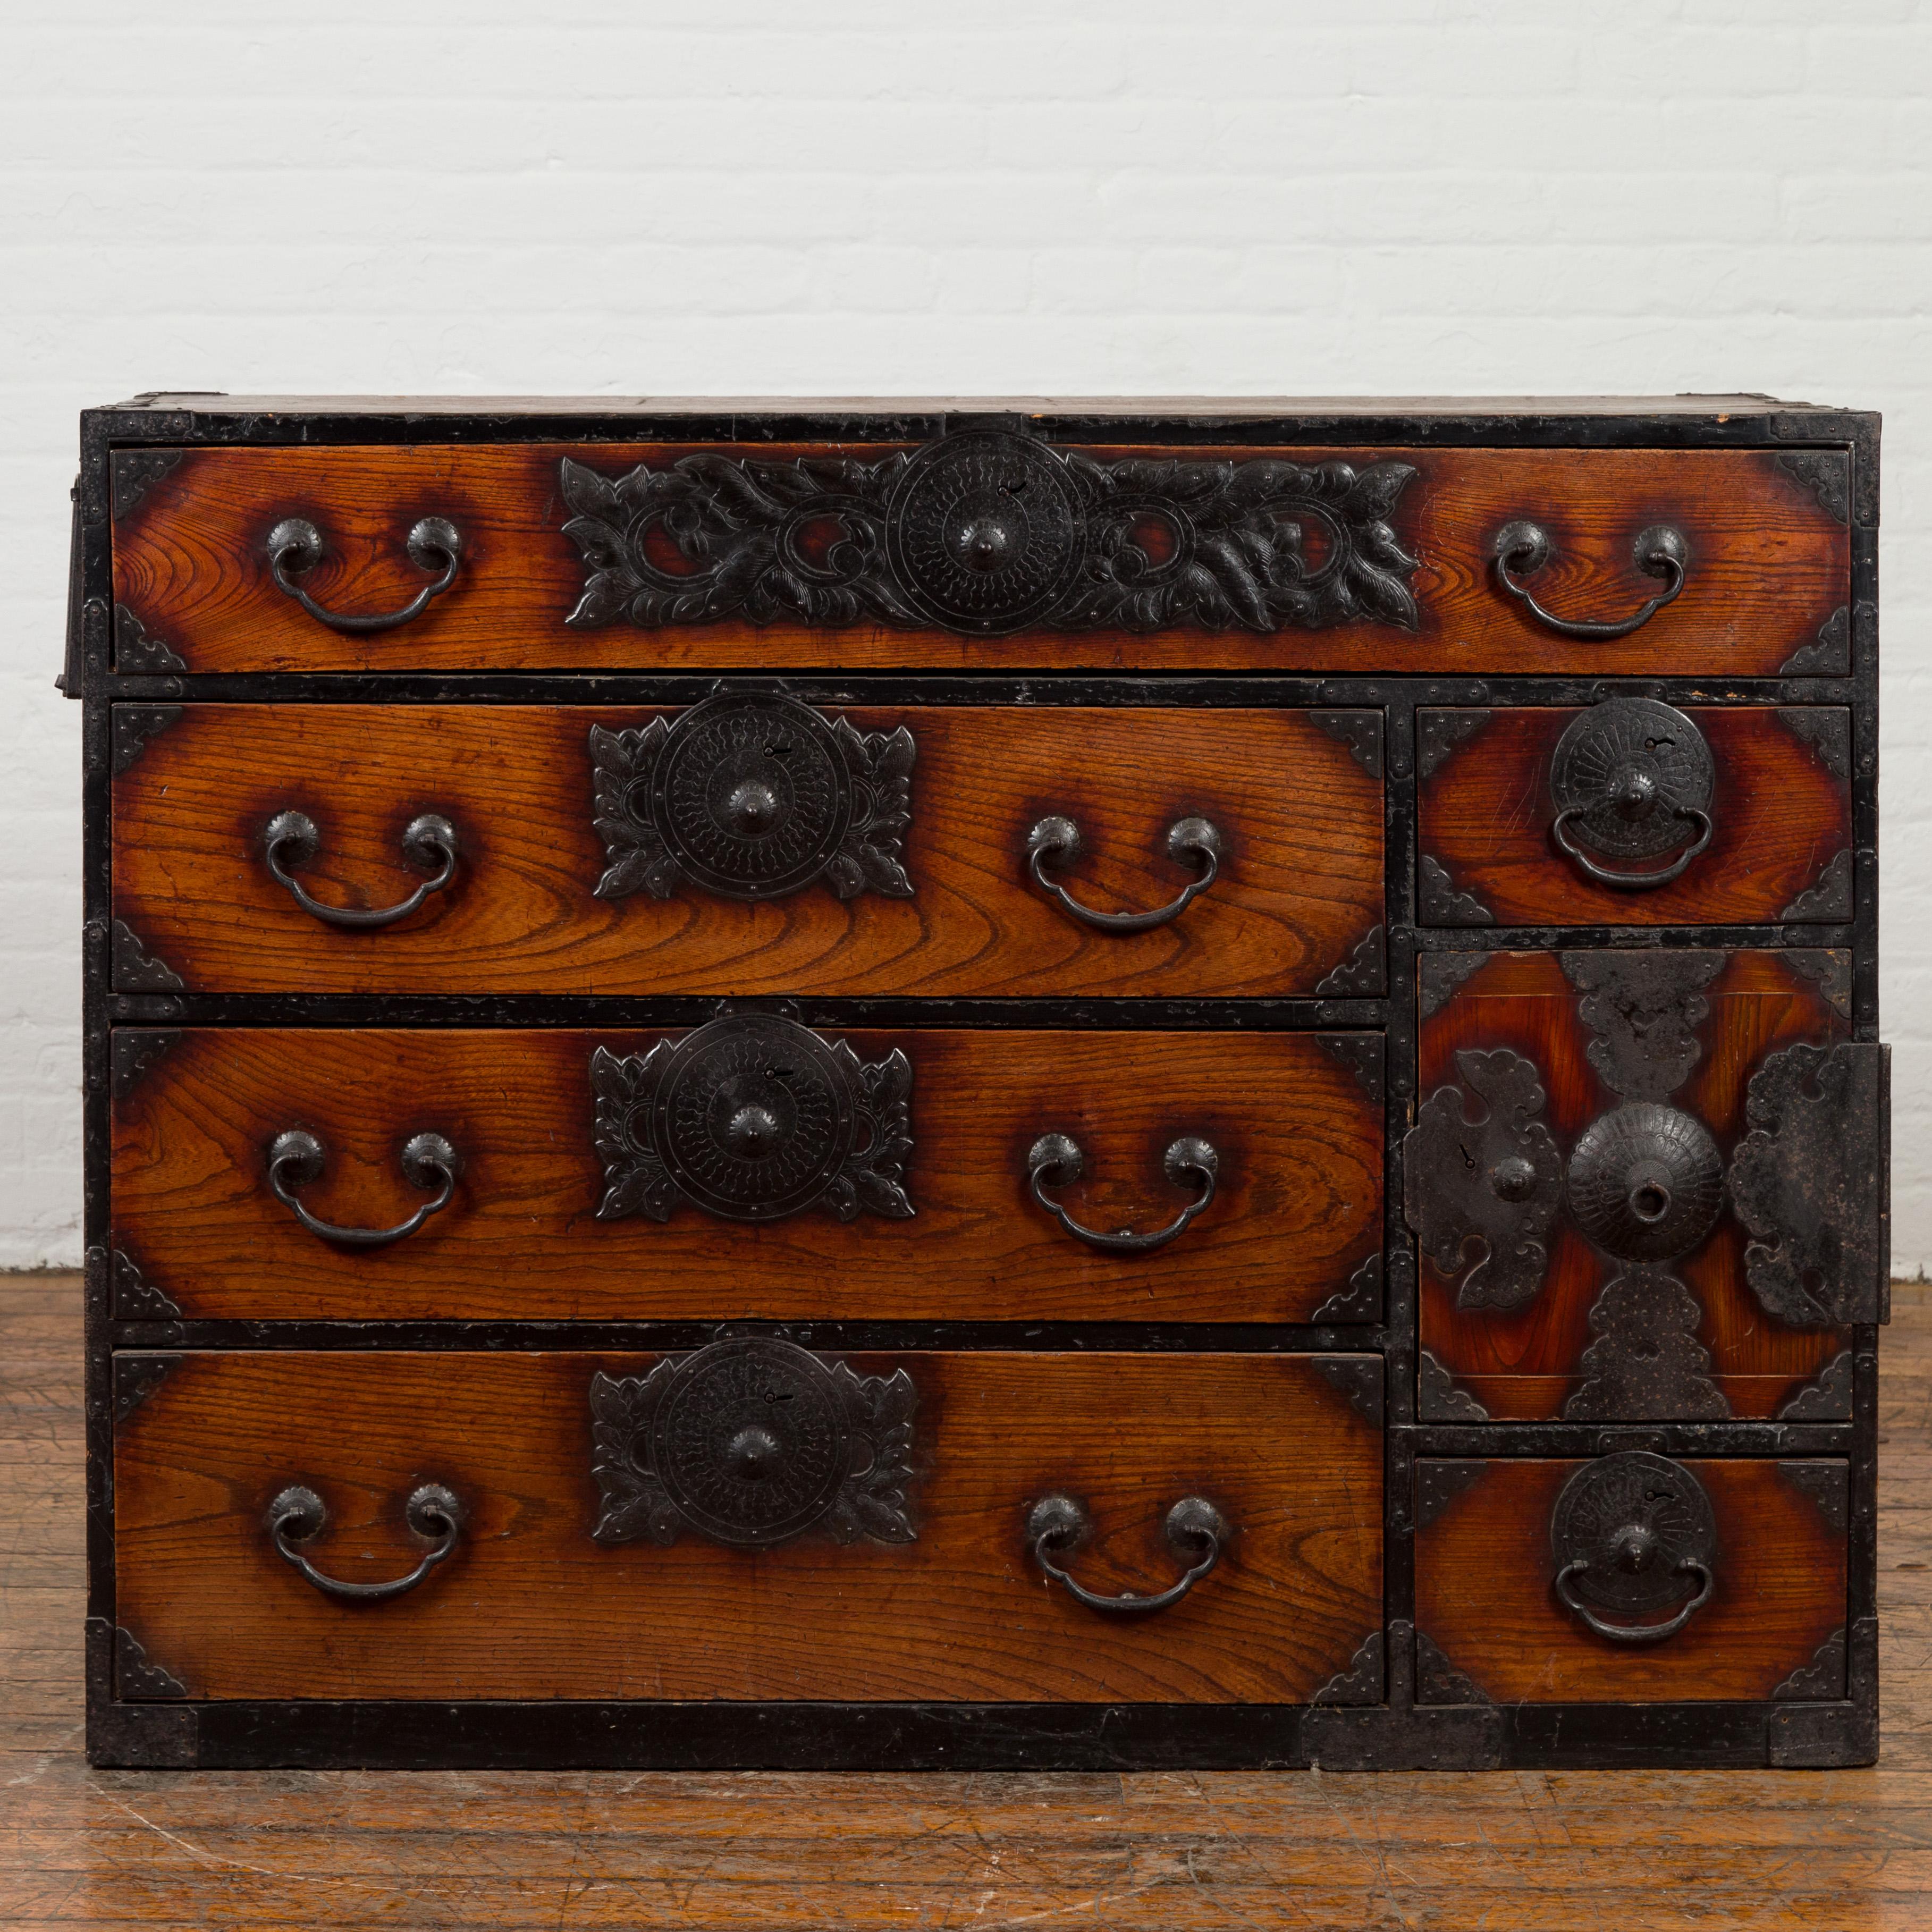 A Japanese Meiji period keyaki wood Sendai tansu clothing chest from the late 19th century, with hand-cut iron hardware and safe box. Created in the Sendai Prefecture during the last quarter of the 19th century, this keyaki (elm) wood tansu is a